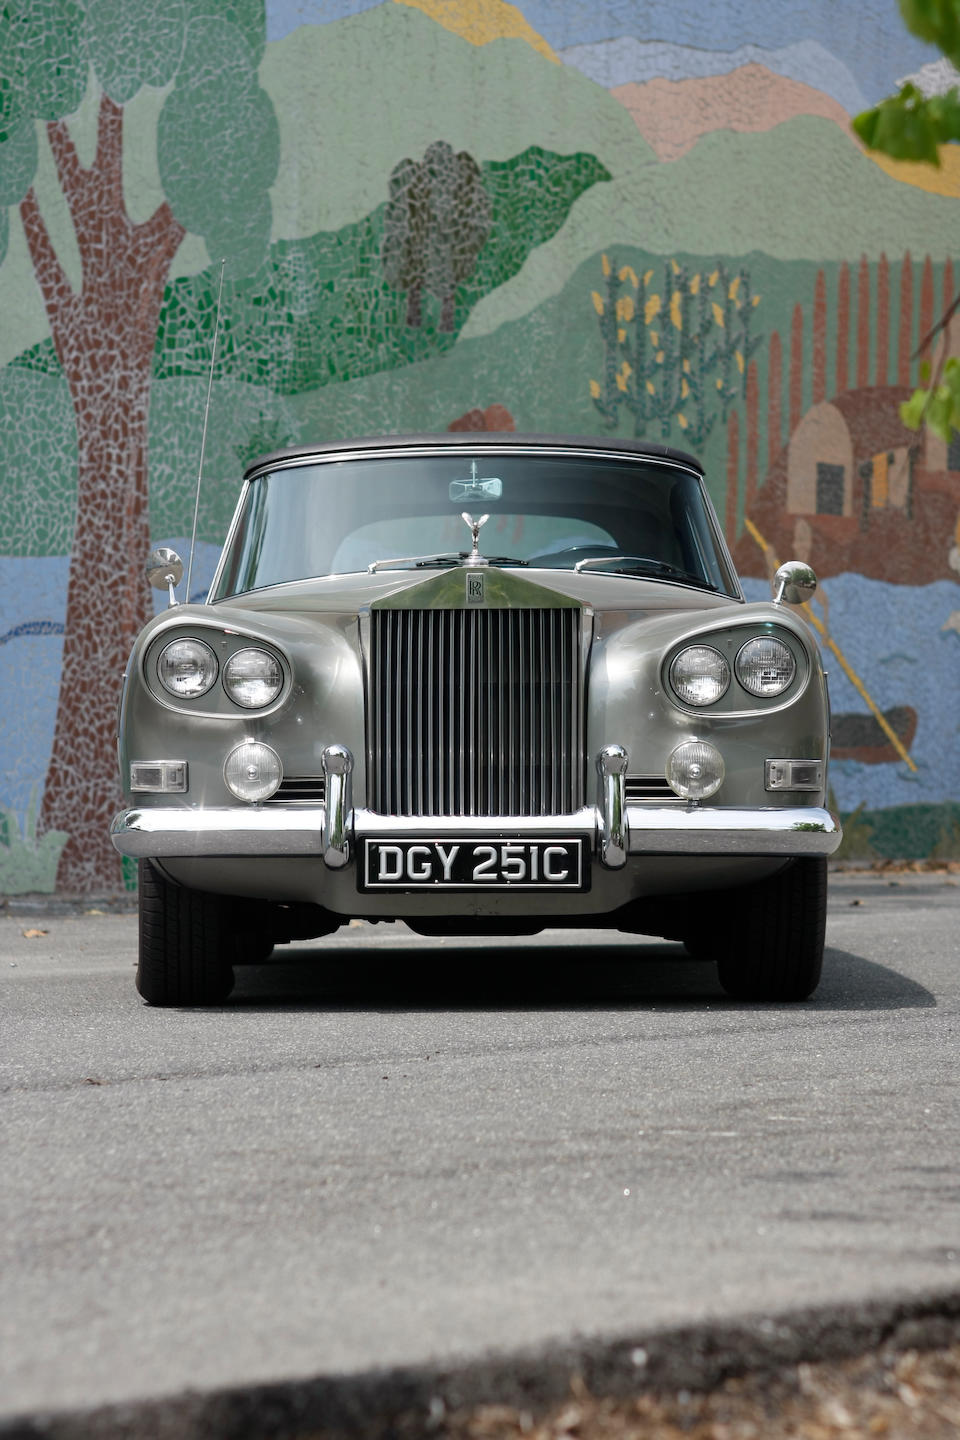 One family ownership from new,1965 Rolls-Royce Silver Cloud III Convertible  Chassis no. LCSC 113B